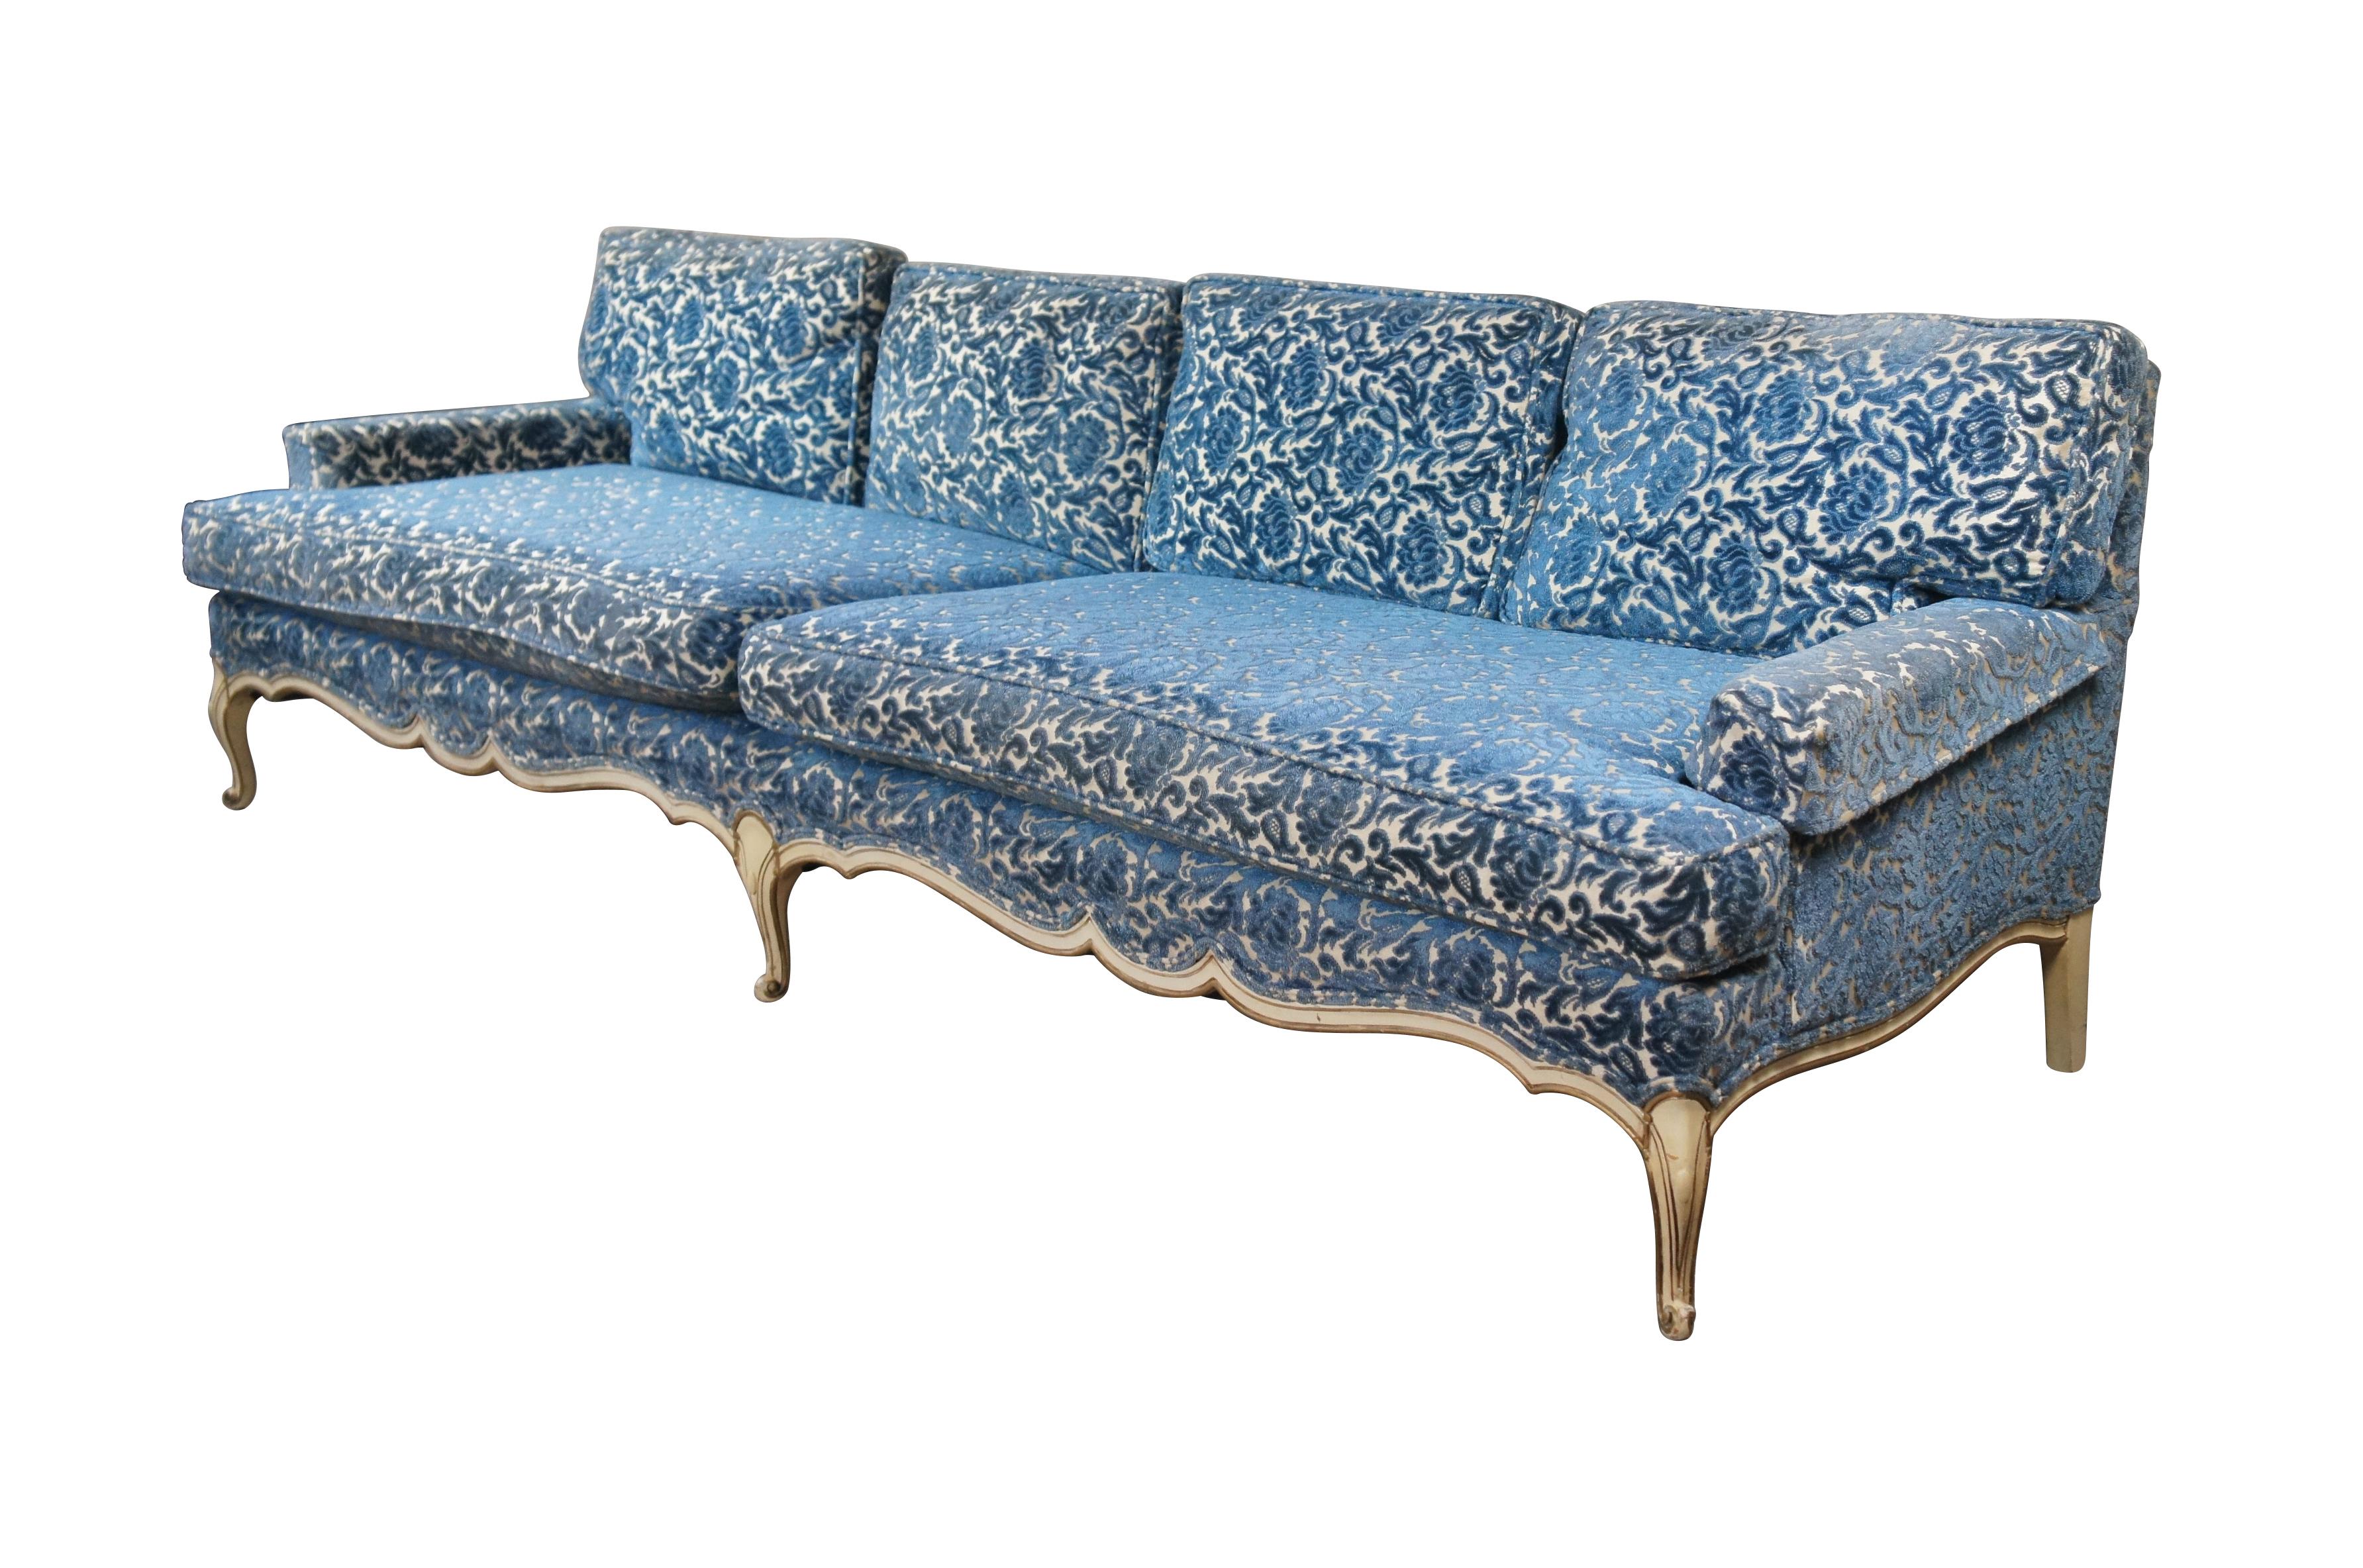 Retro Mid Century French Provincial day sofa by Interior Crafts.  Features scalloped frame with cabriole legs and raised blue velvet upholstery with duck down filled back cushions.

Dimensions:
34